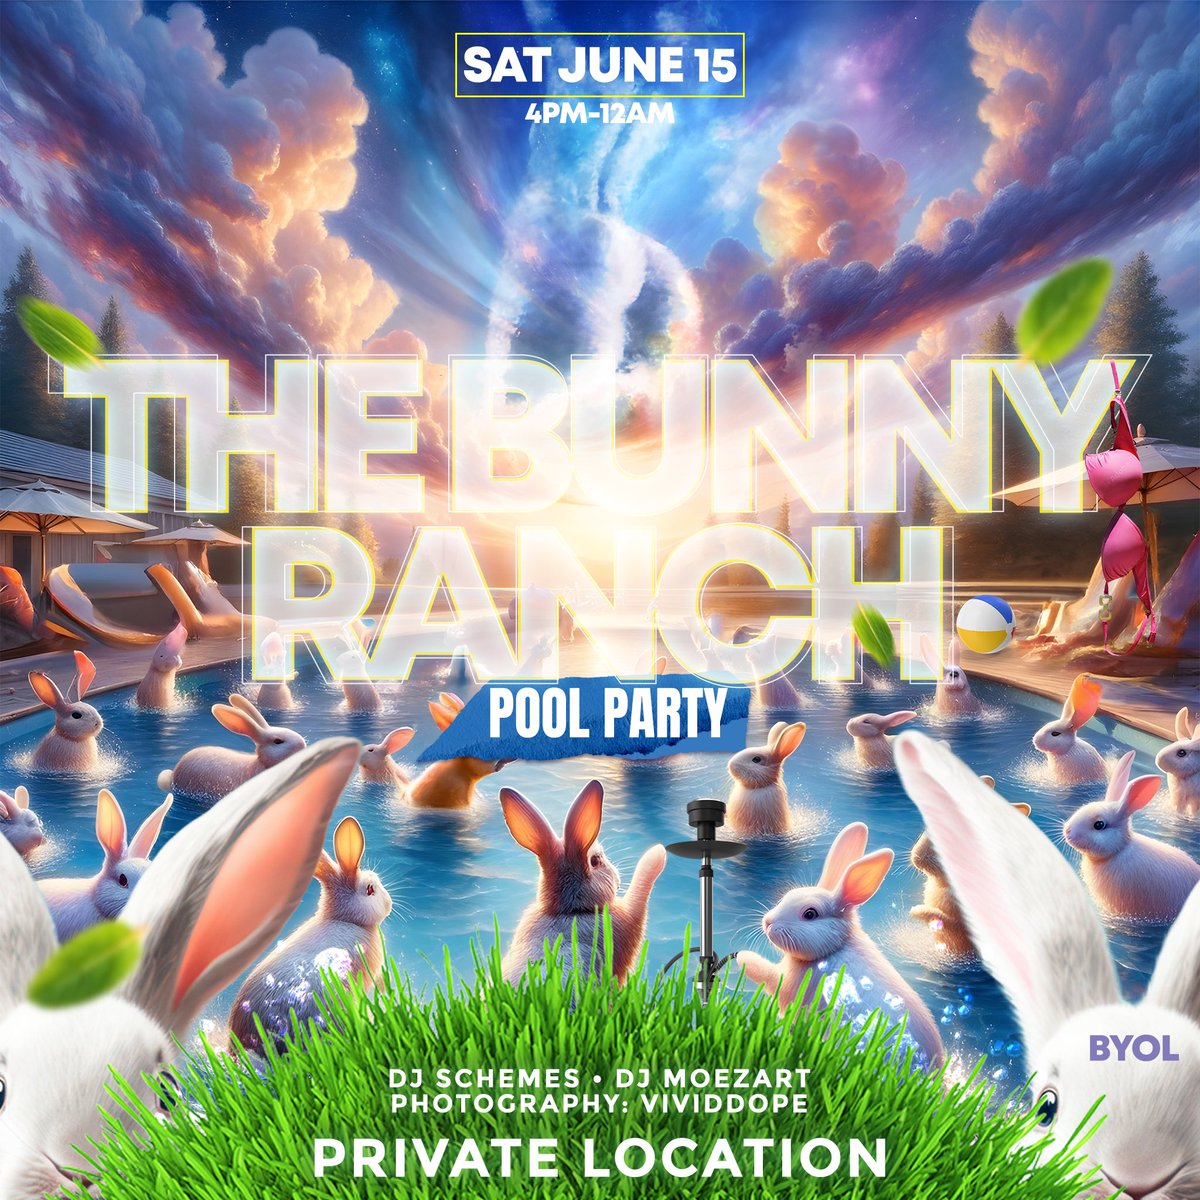 Damn, you still ain’t got your tickets to #TheBunnyRanch 🤭 here’s the link! ticketleap.events/tickets/the-bu…